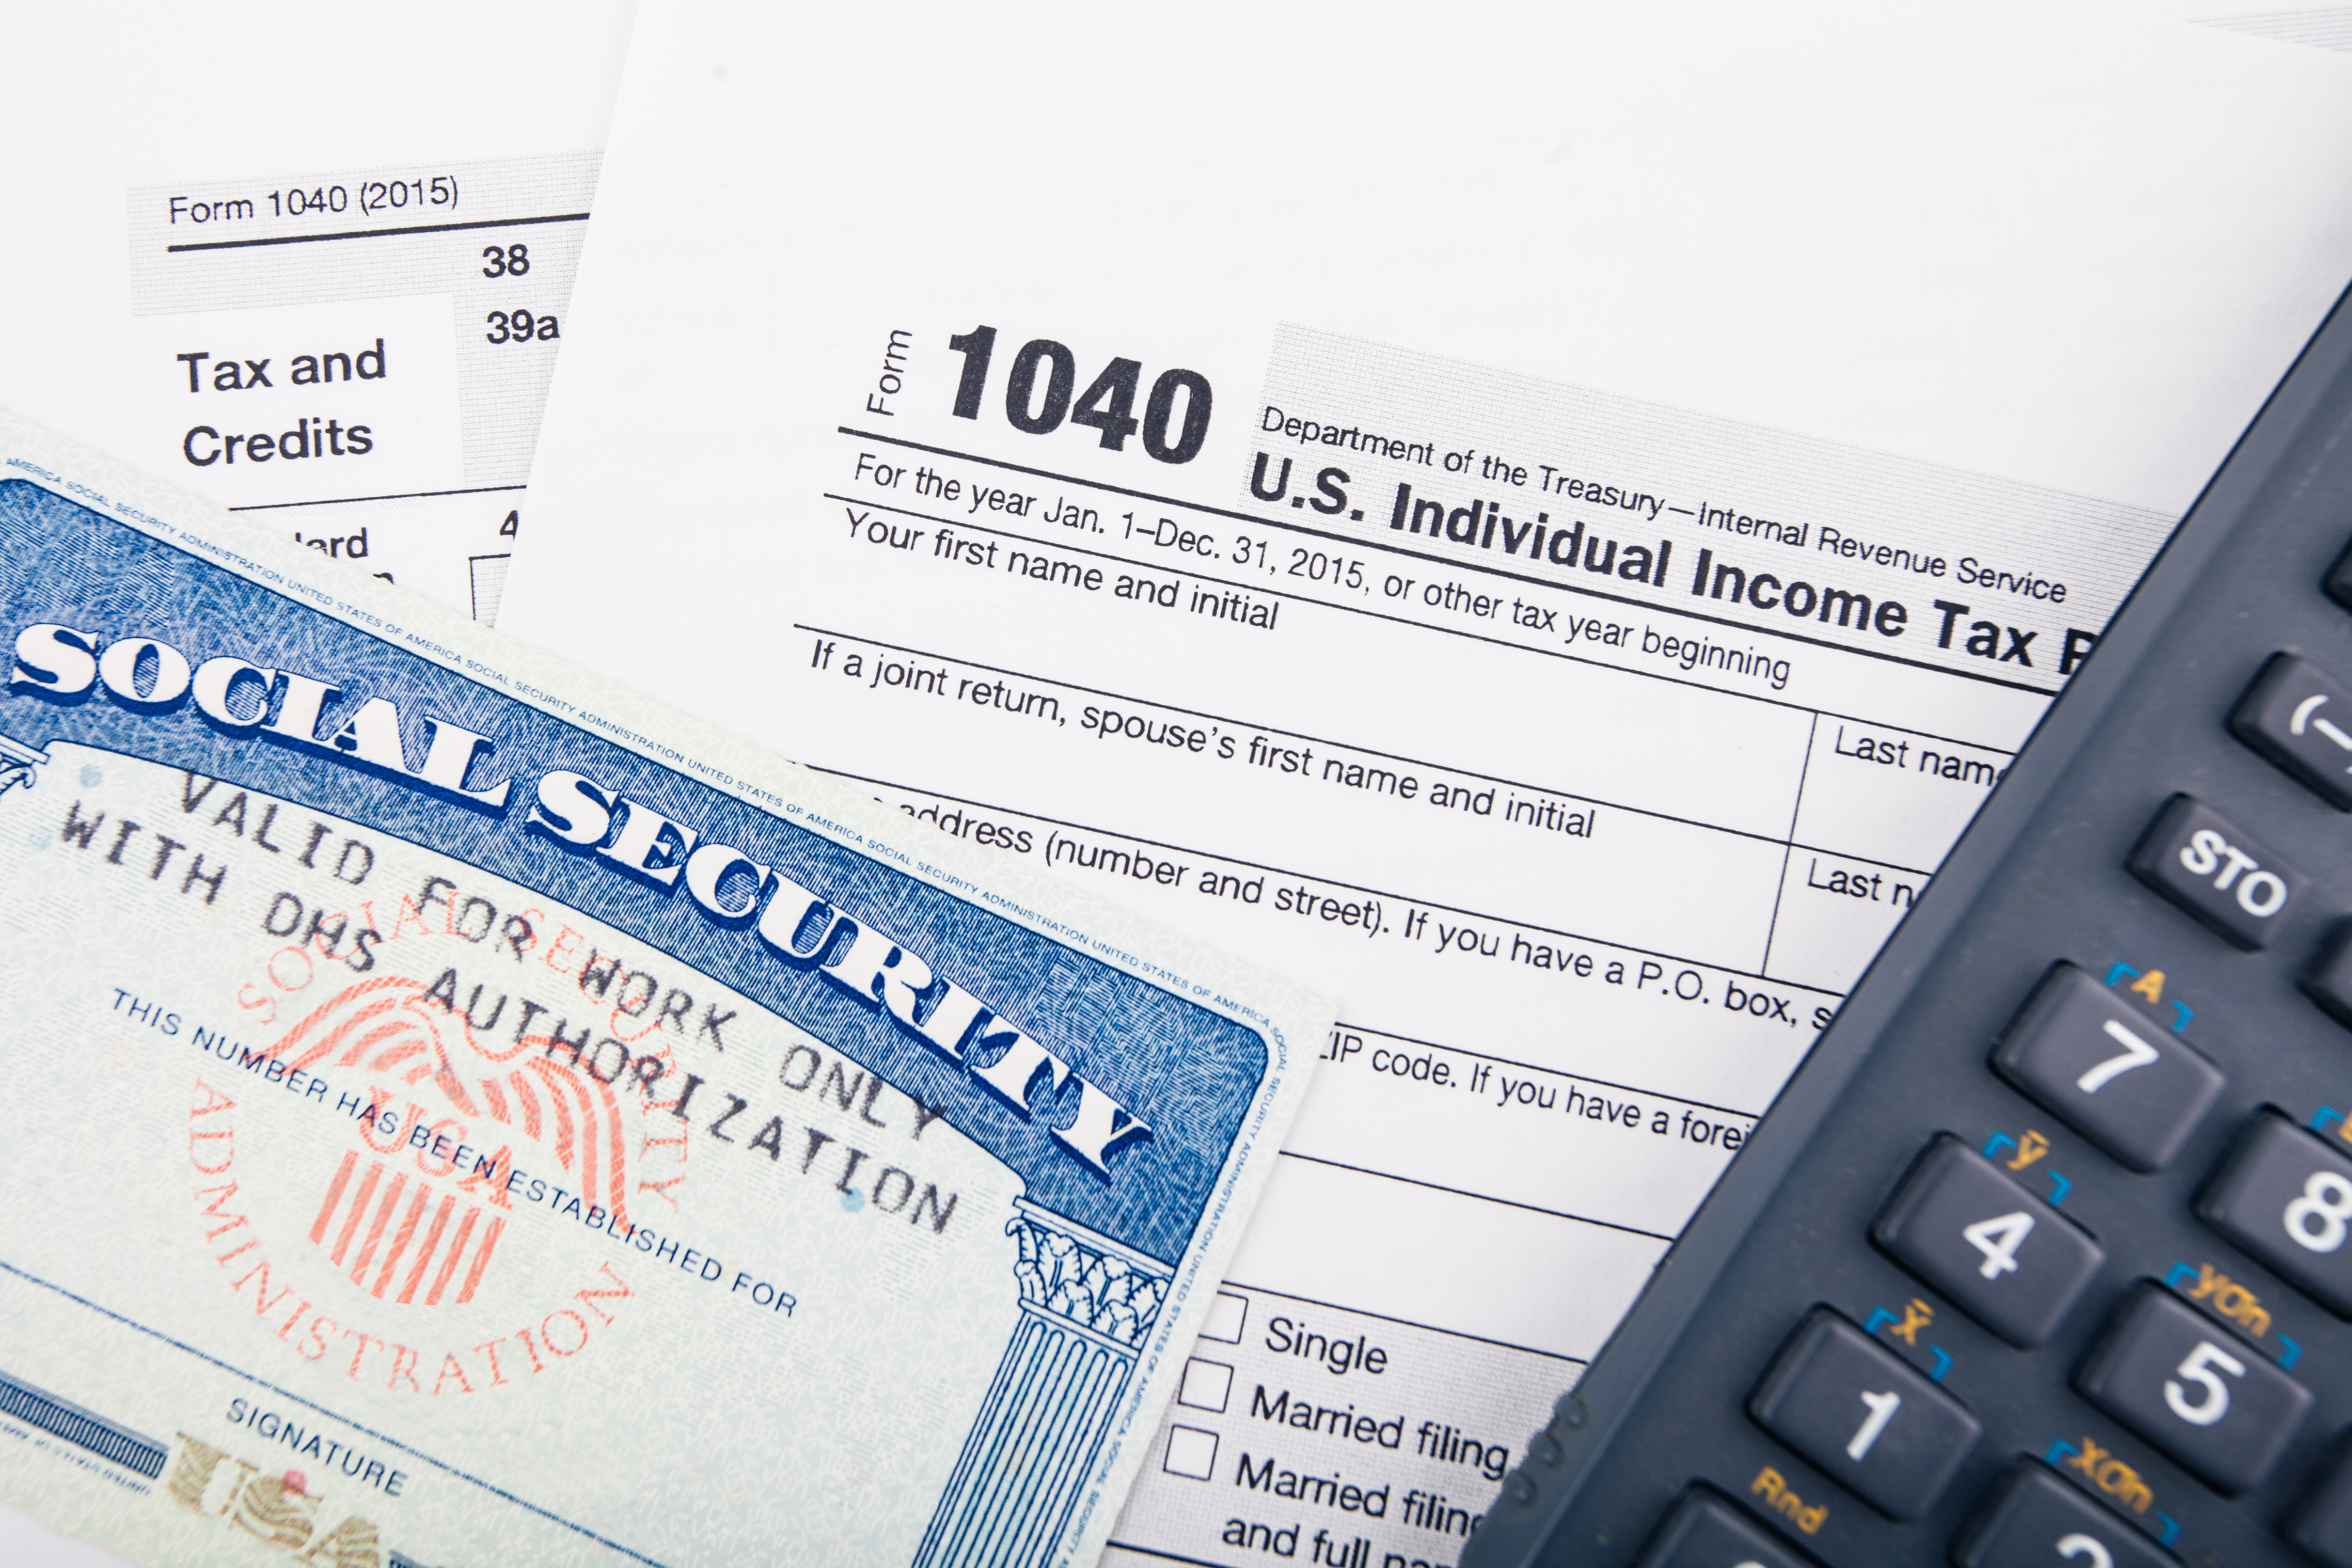 Tax return forms and documents